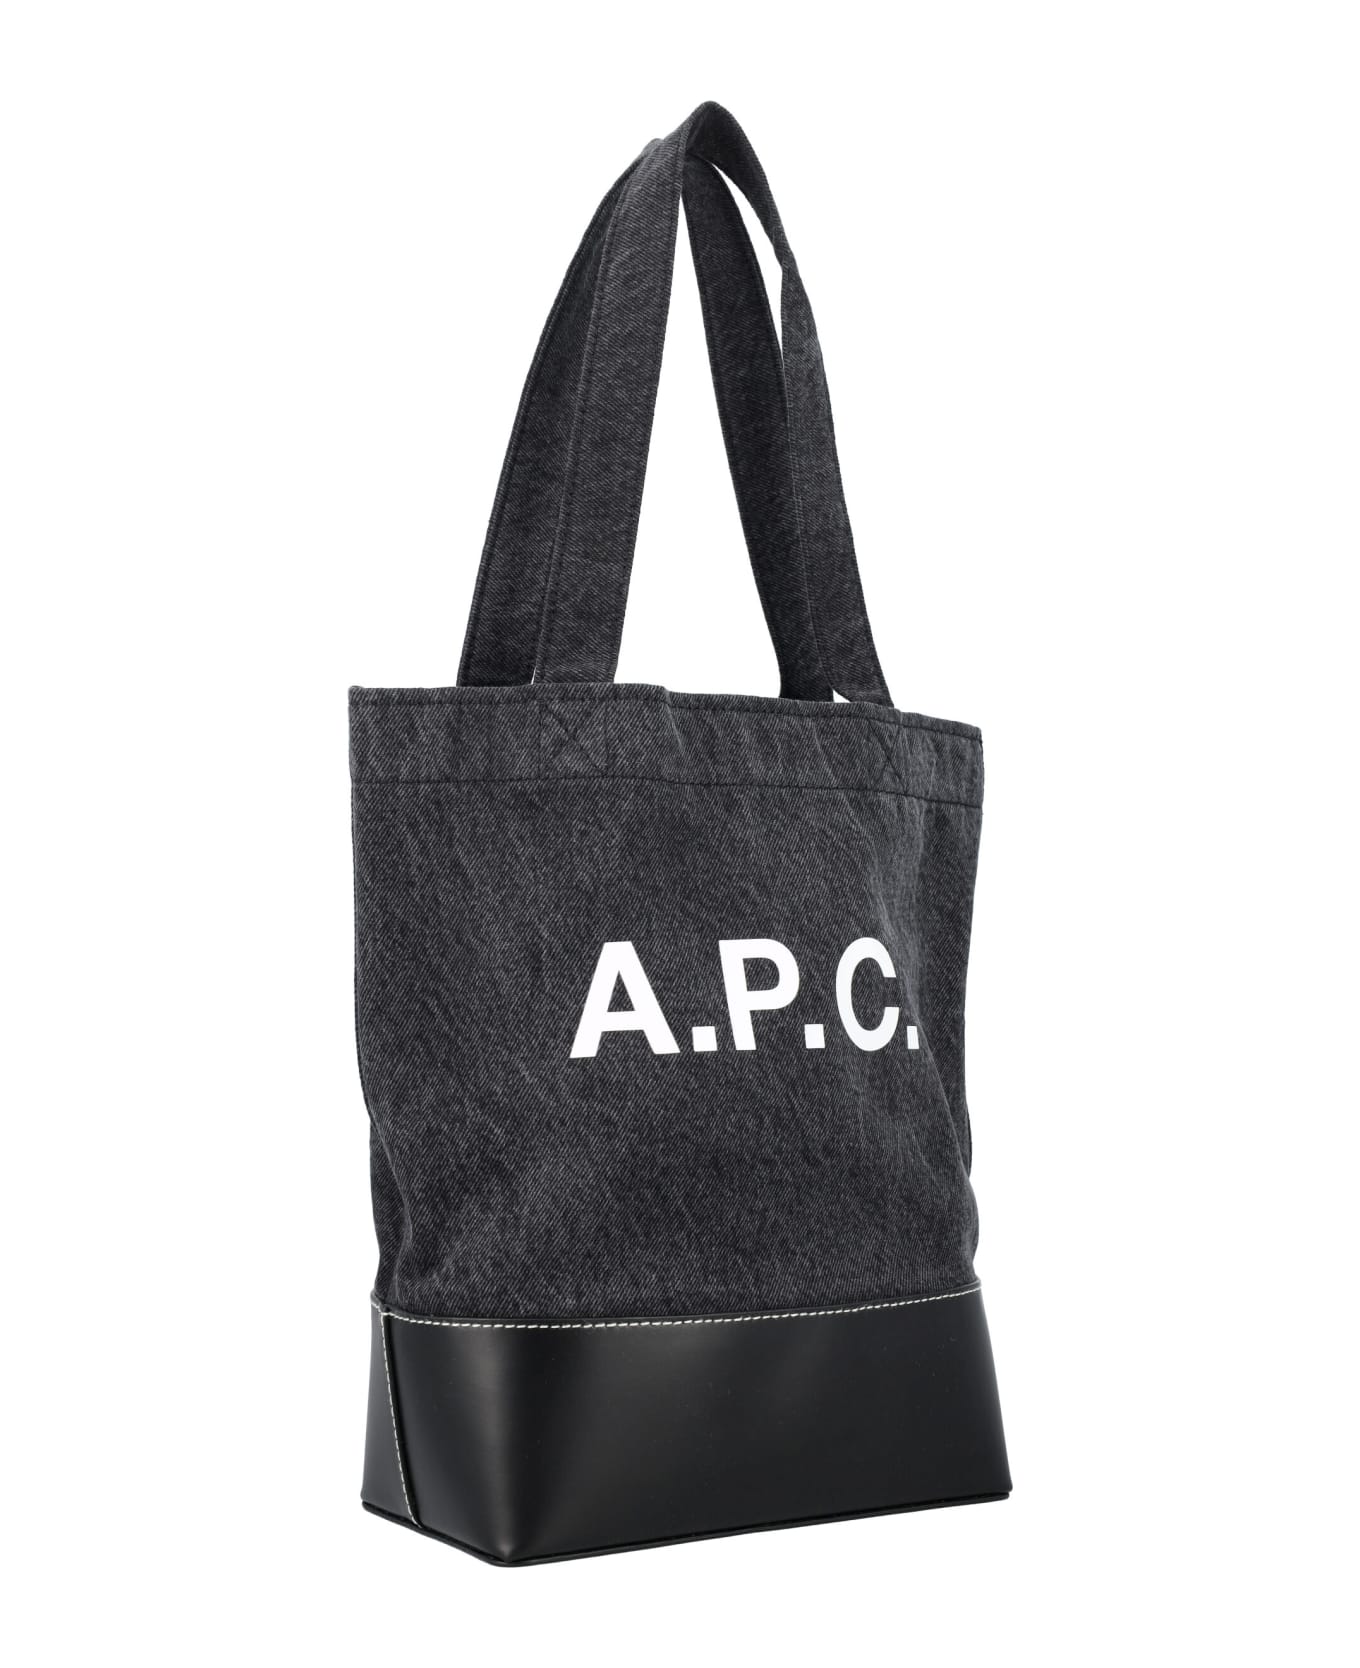 A.P.C. Axel Small Tote Bag - BLACK BLUE トートバッグ